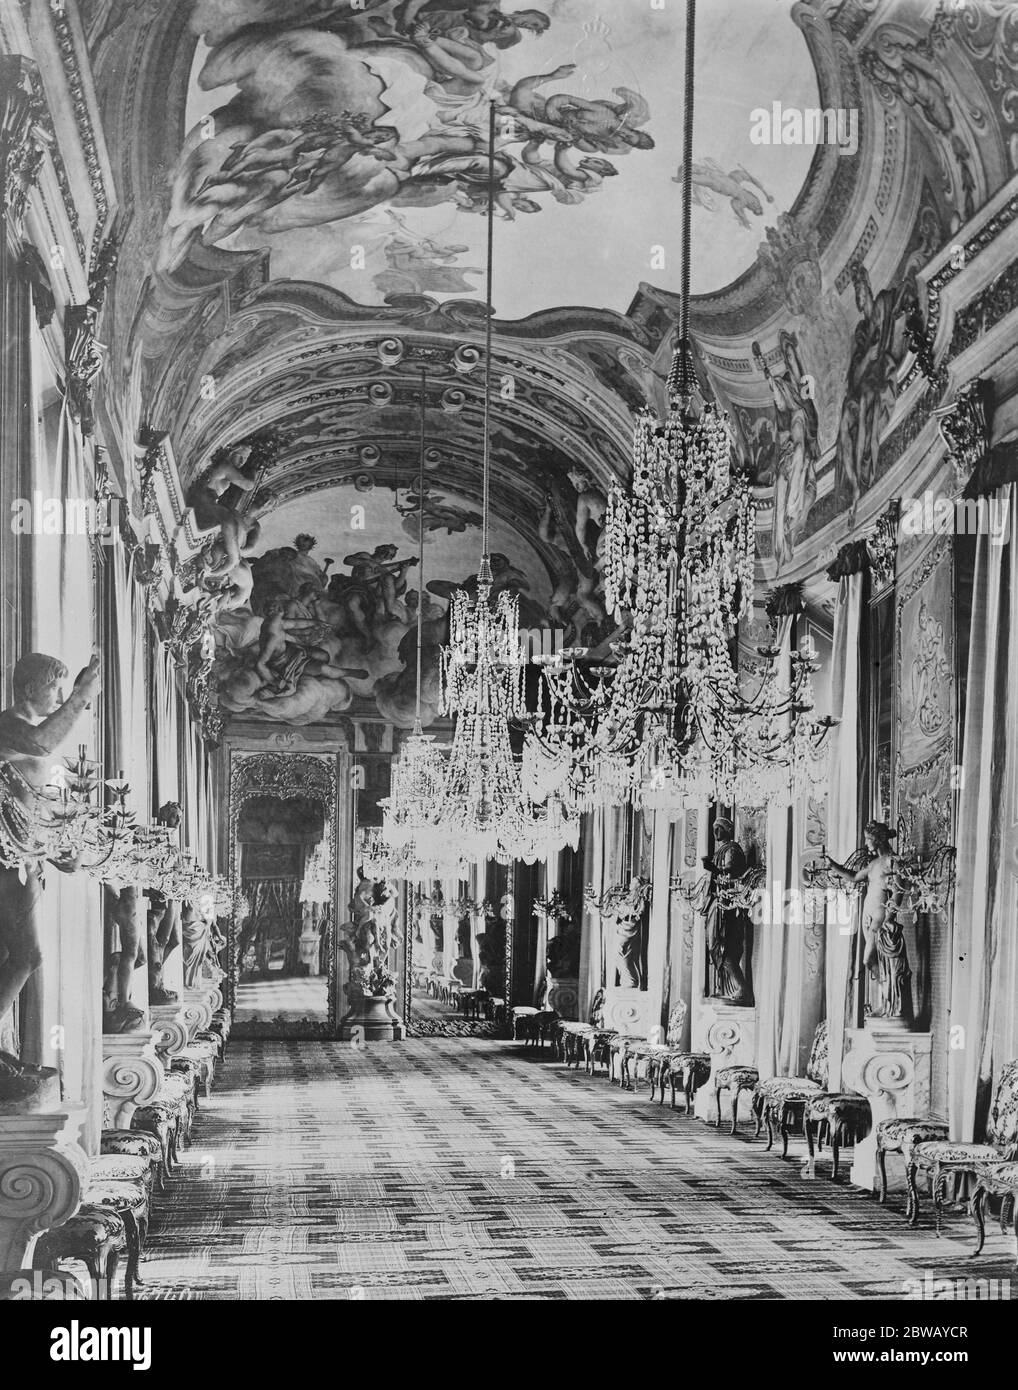 The Genoa Conference The interior of the Royal Palace at Genoa where the important sittings of the Conference will be held 31 Mach 1922 Stock Photo